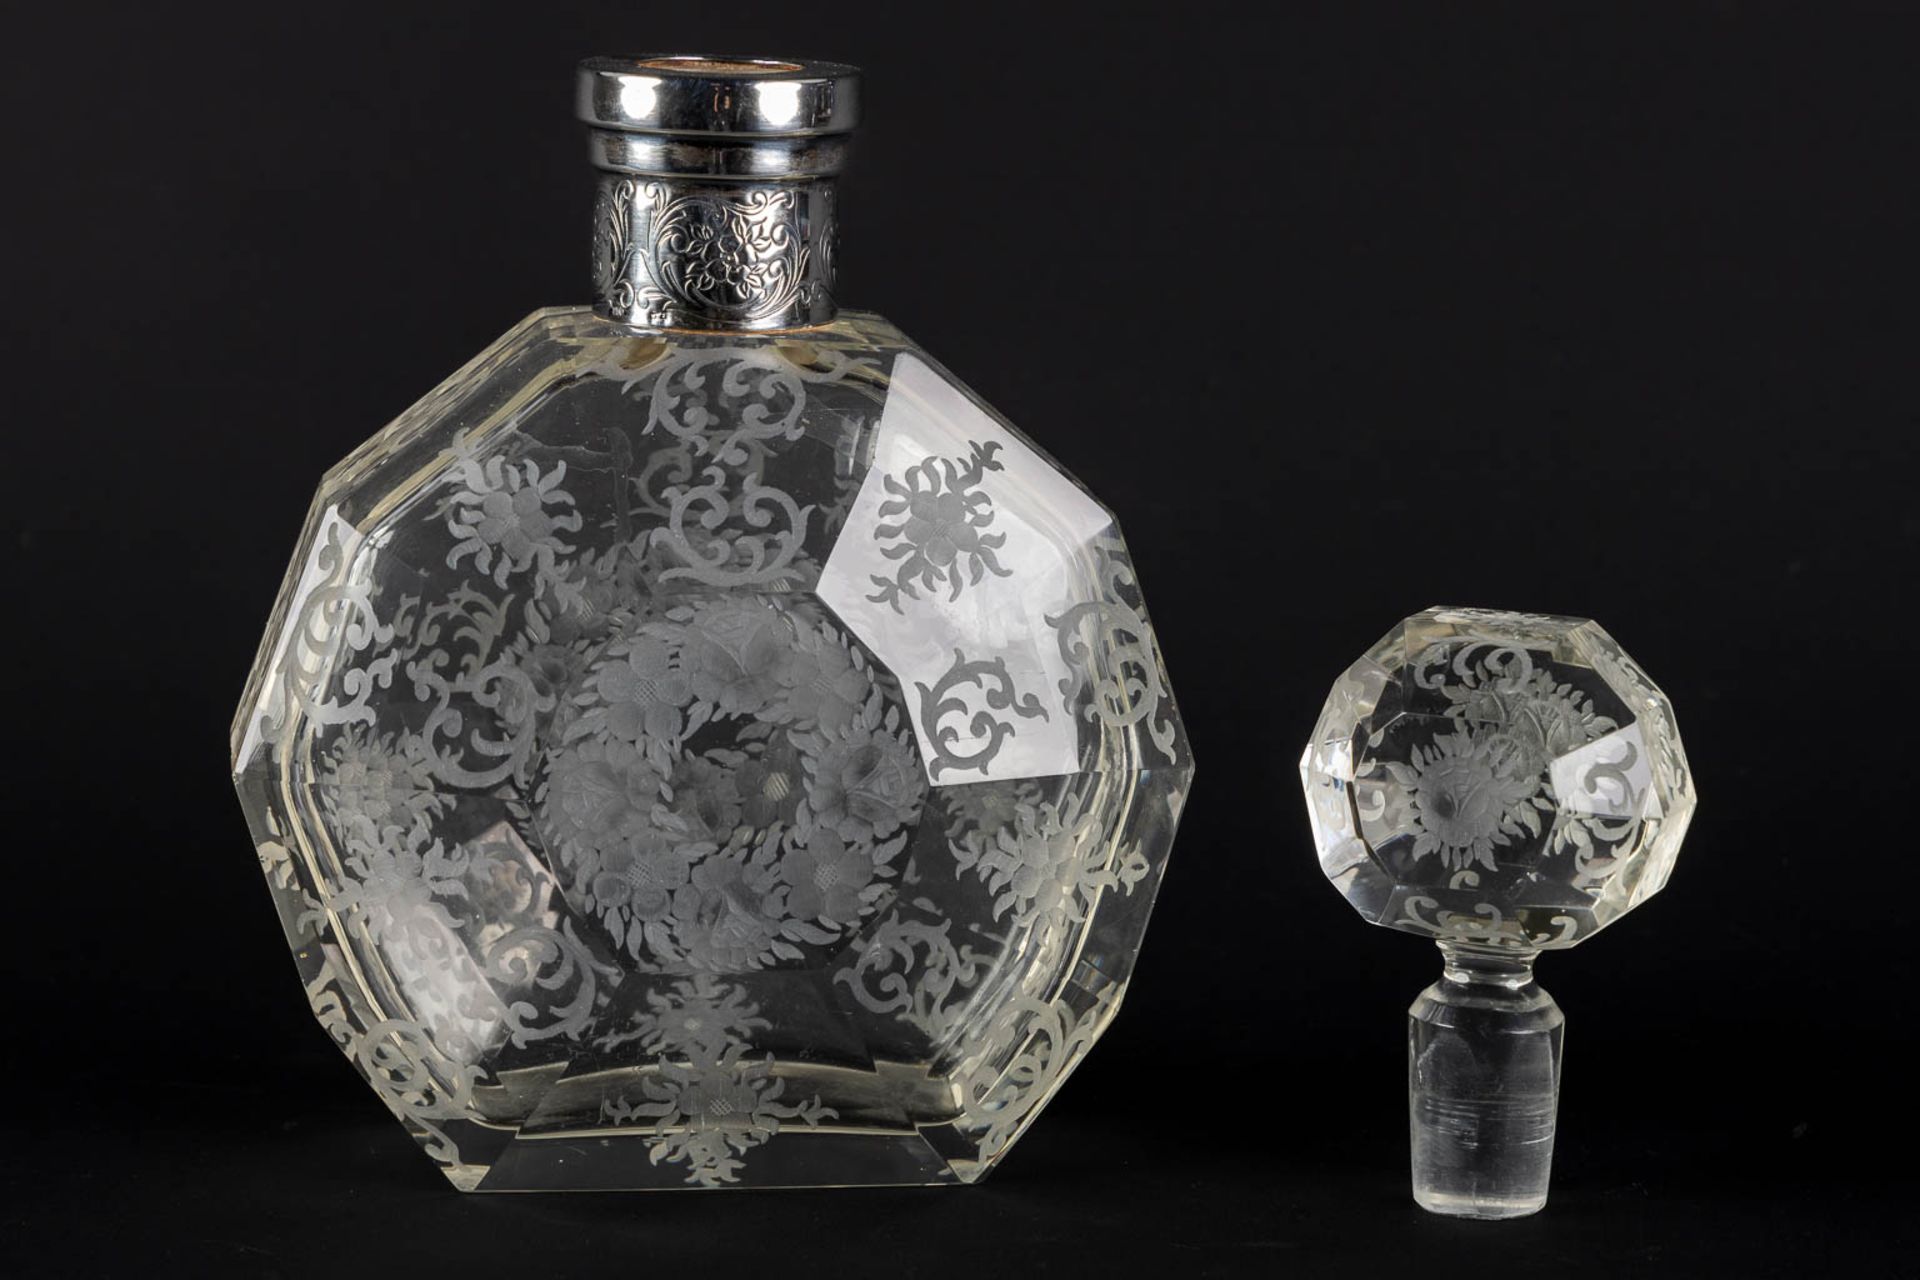 A perfume bottle, etched and mounted with a silver collar, glass. 19th C. (L:8 x W:17 x H:26,5 cm) - Bild 7 aus 11